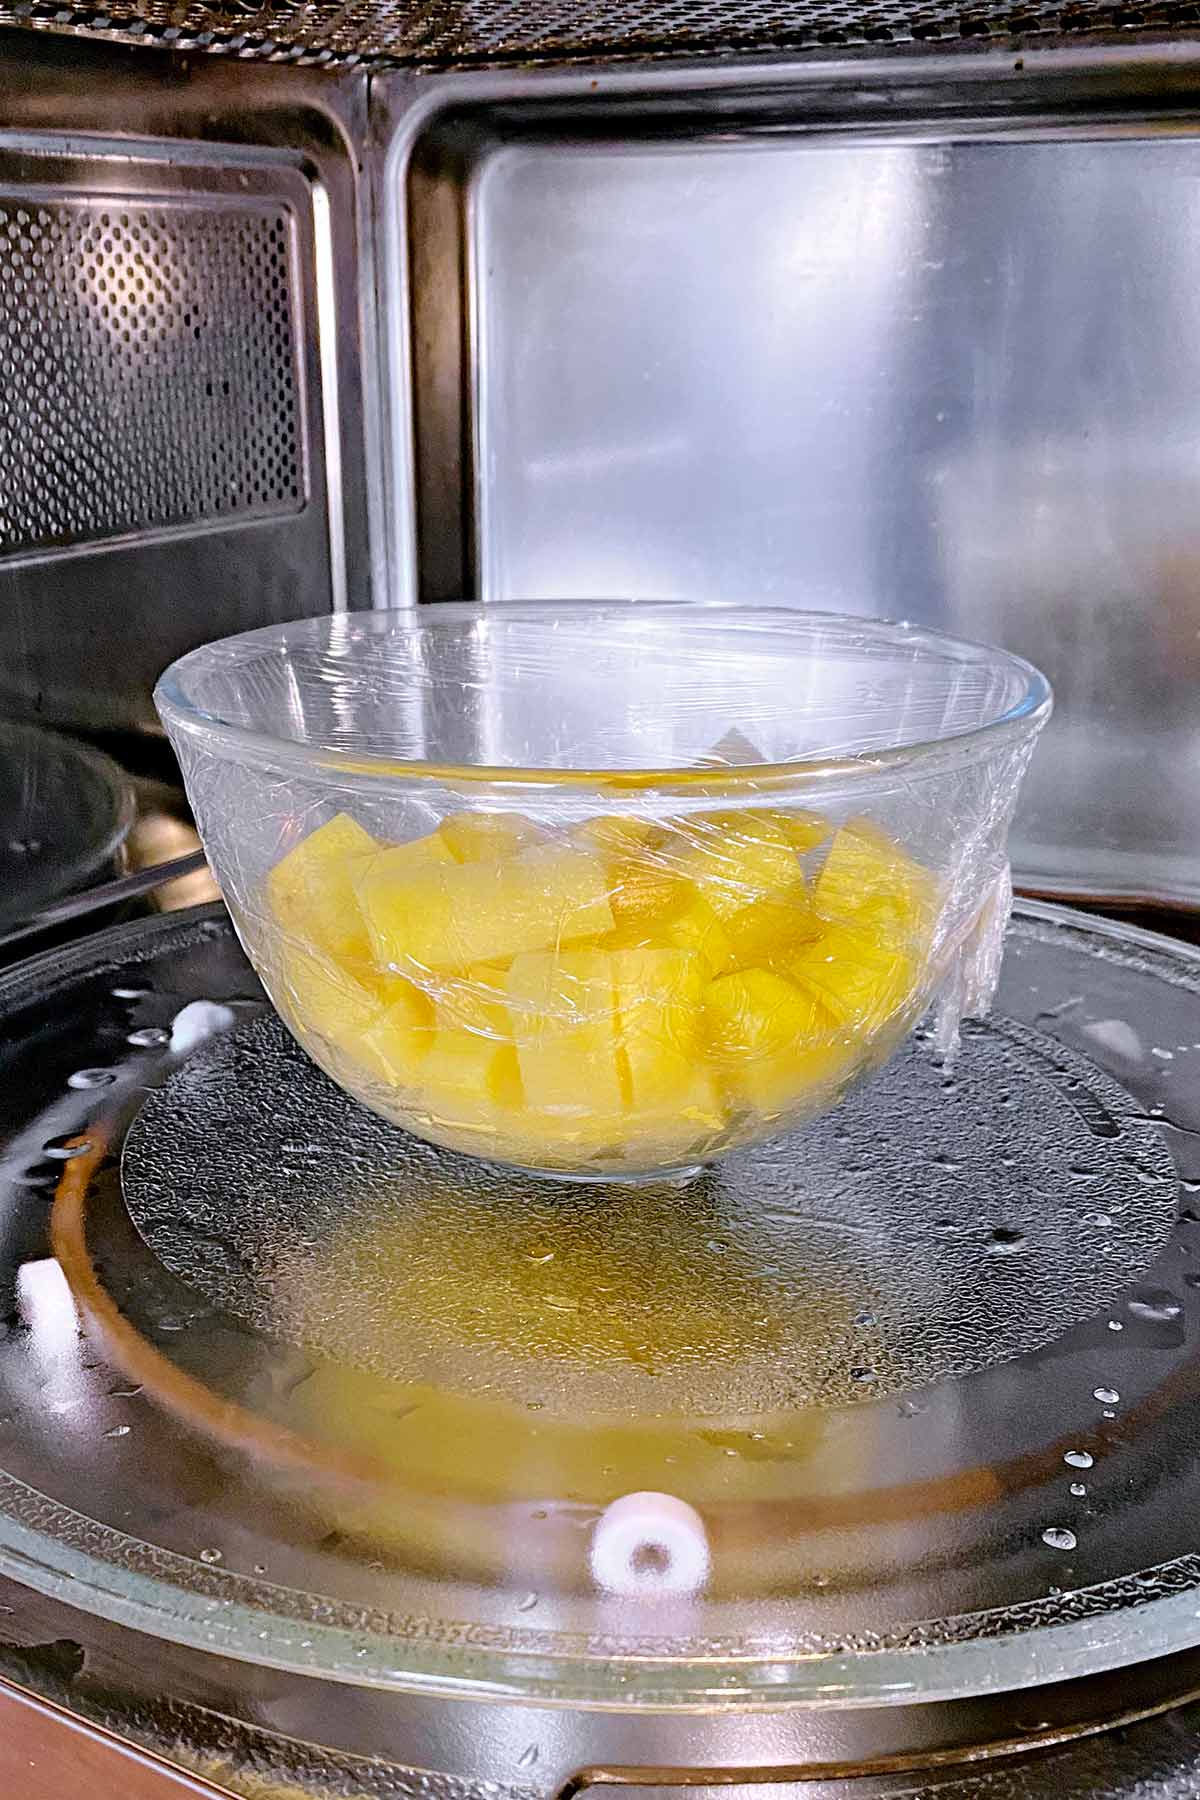 A glass bowl of potatoes in a microwave.